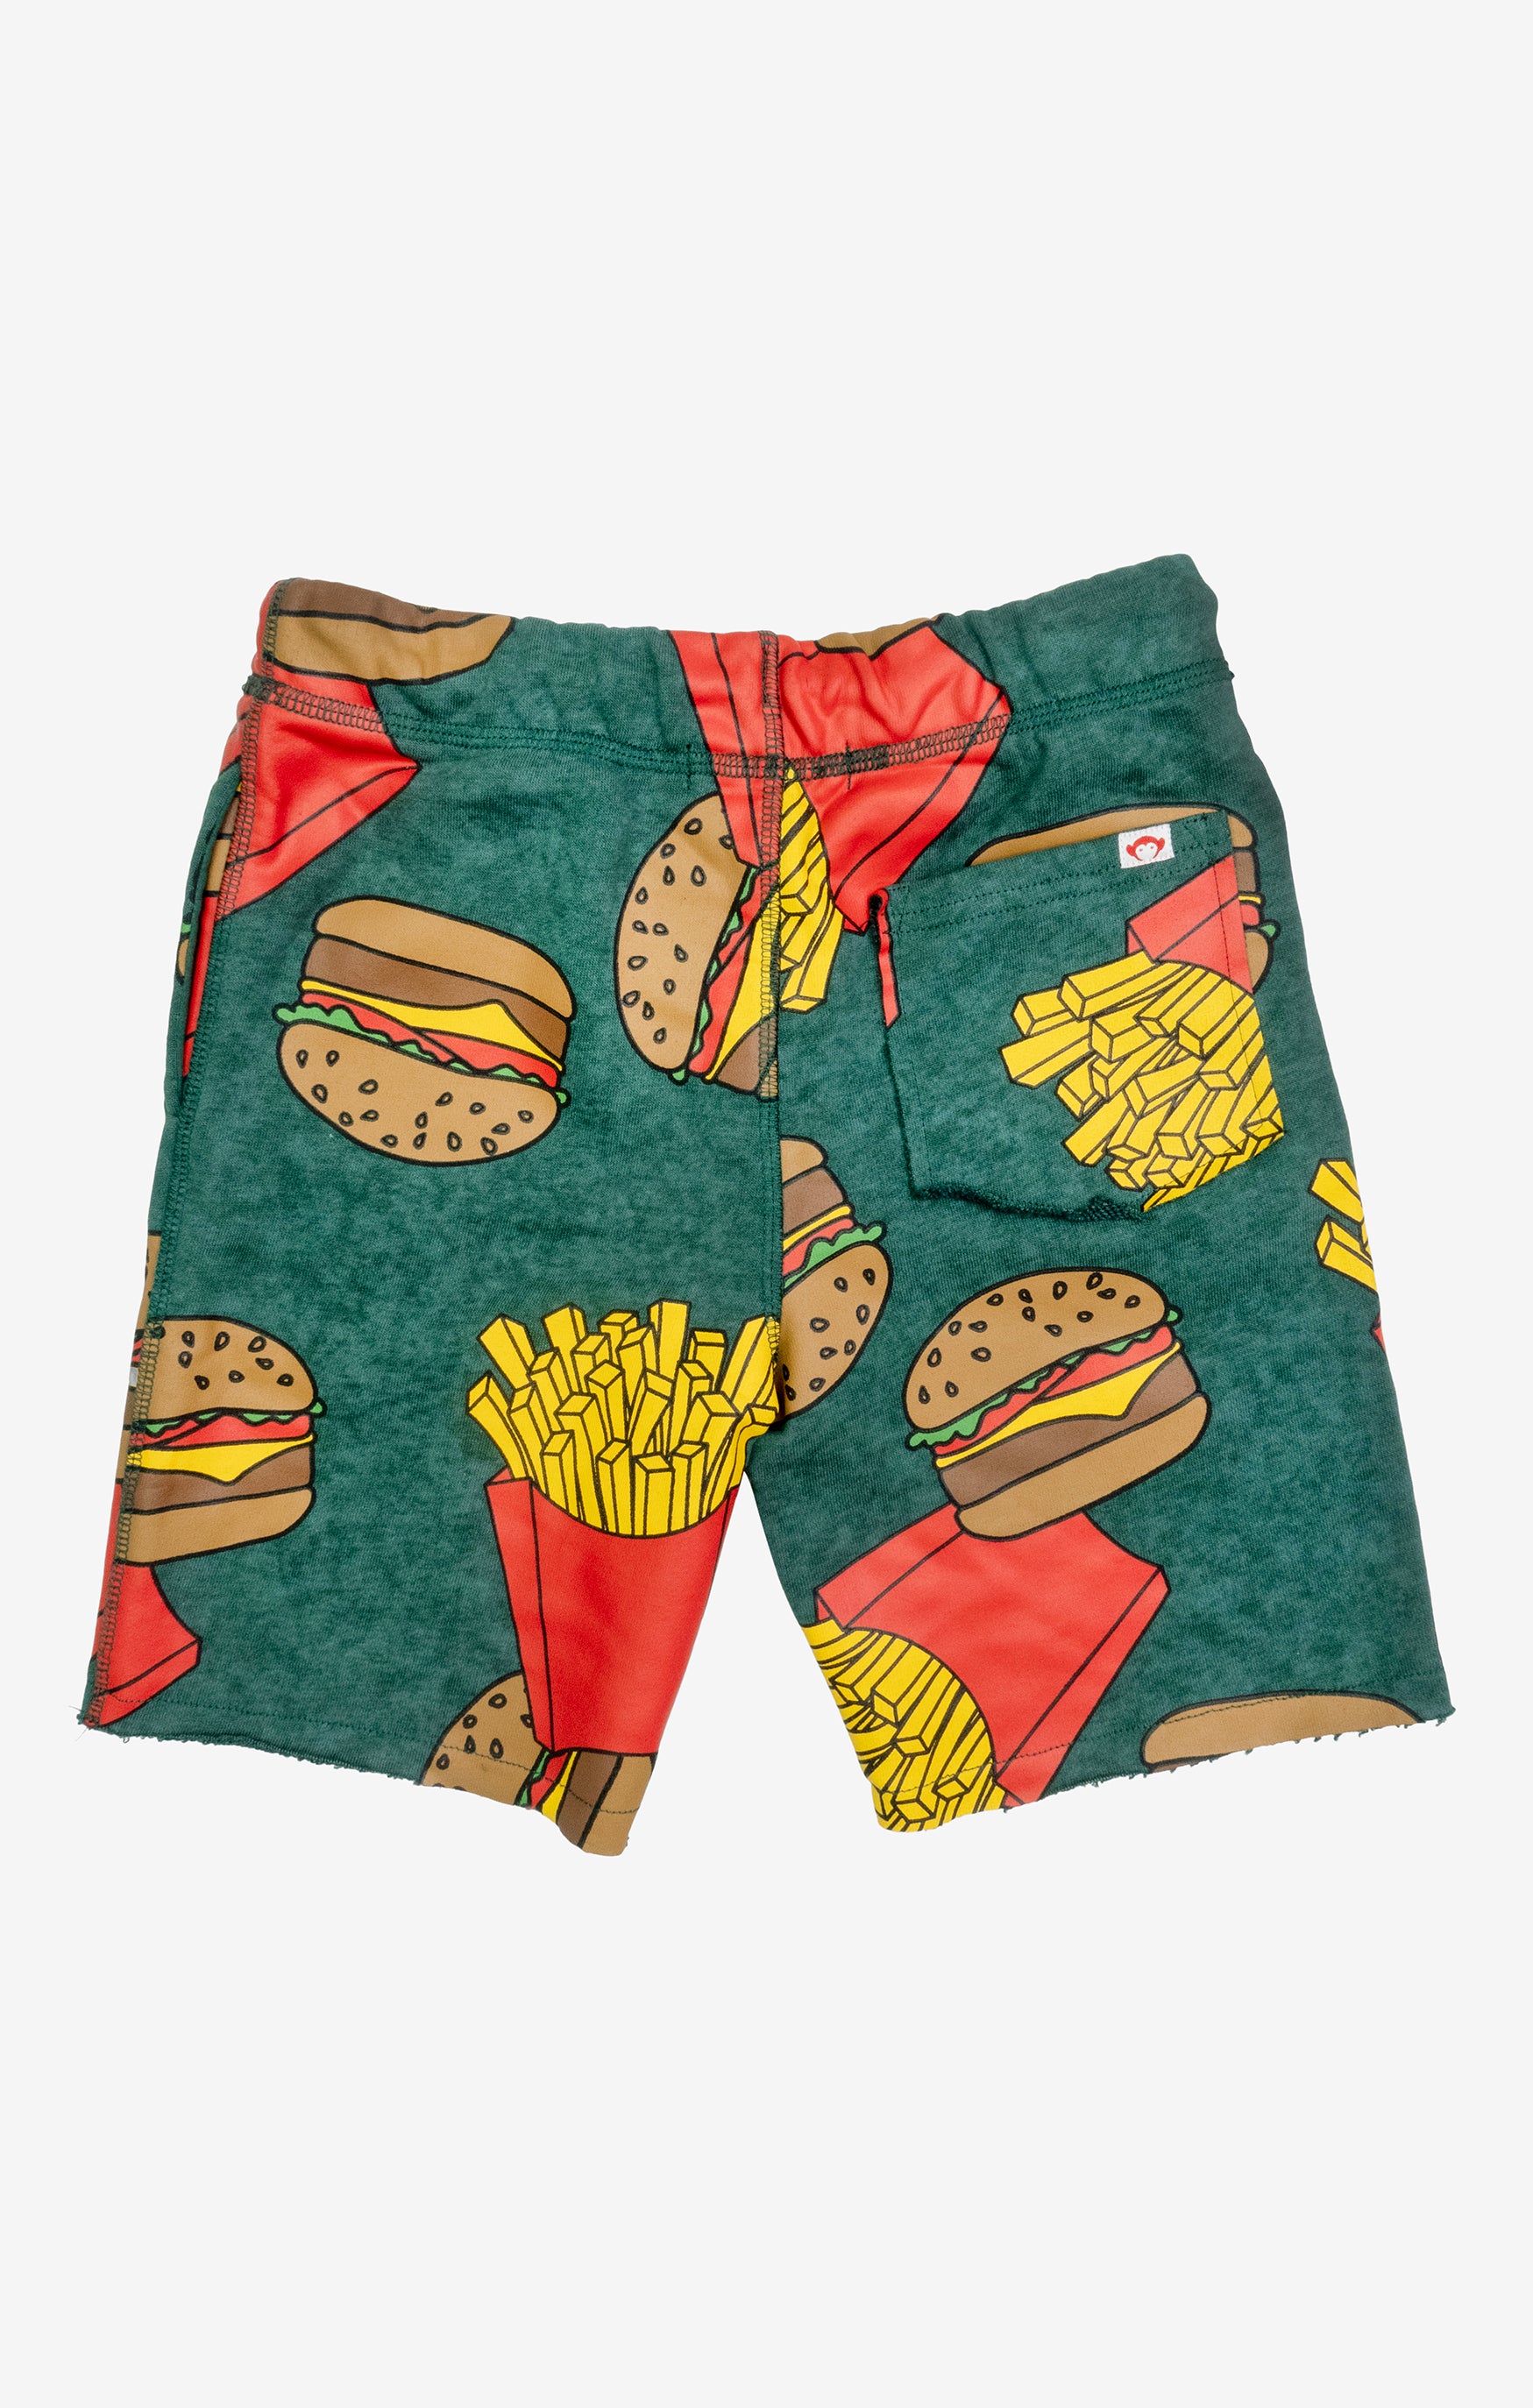 Camp Shorts - Burgers & Fries - Twinkle Twinkle Little One